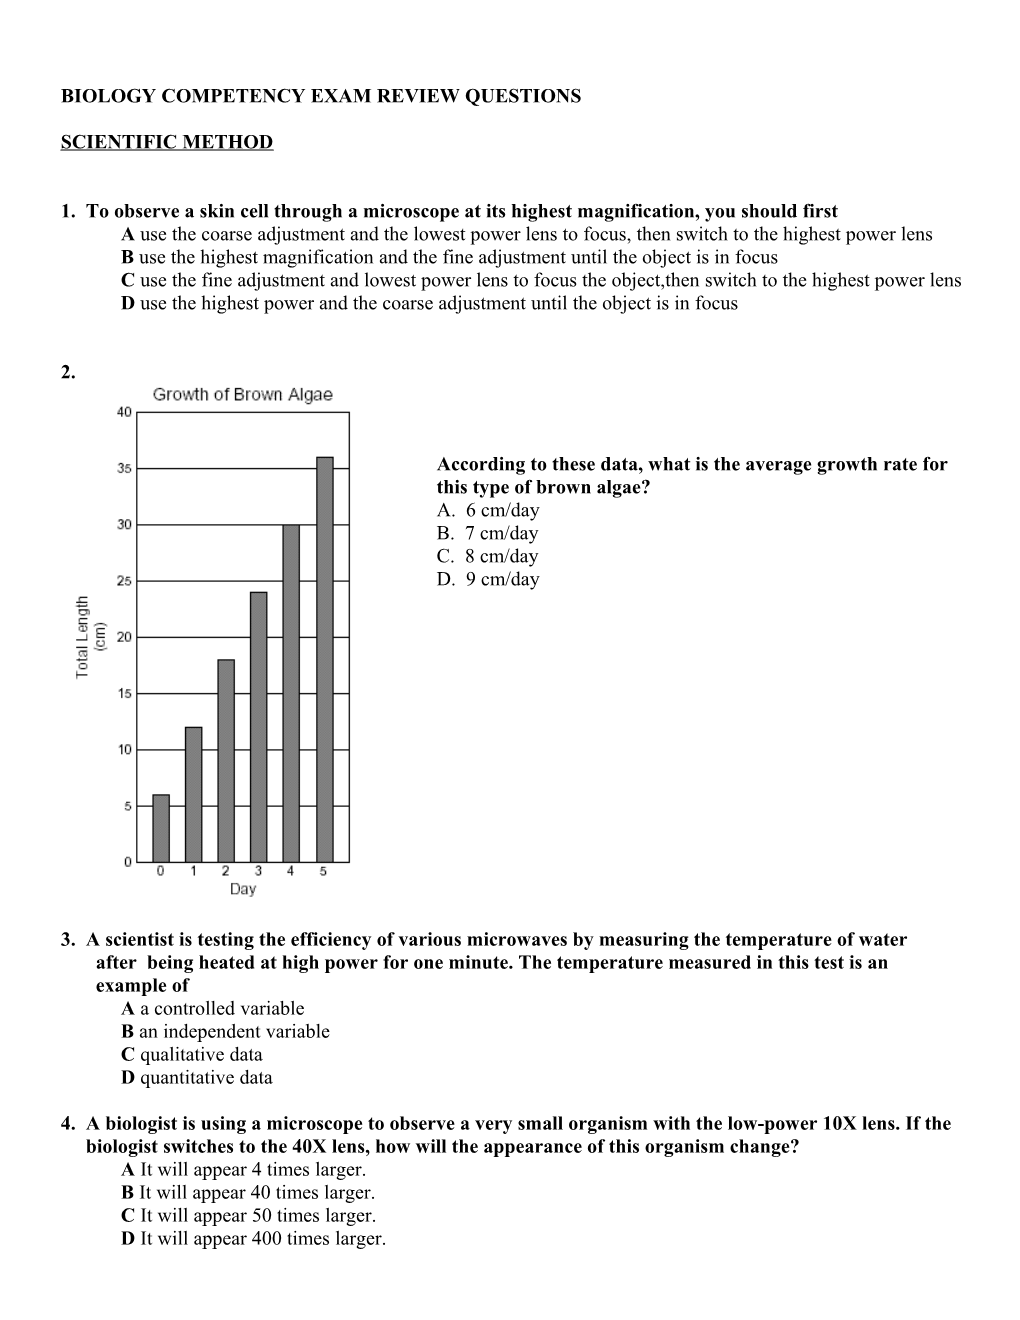 Biology Competency Exam Review Questions